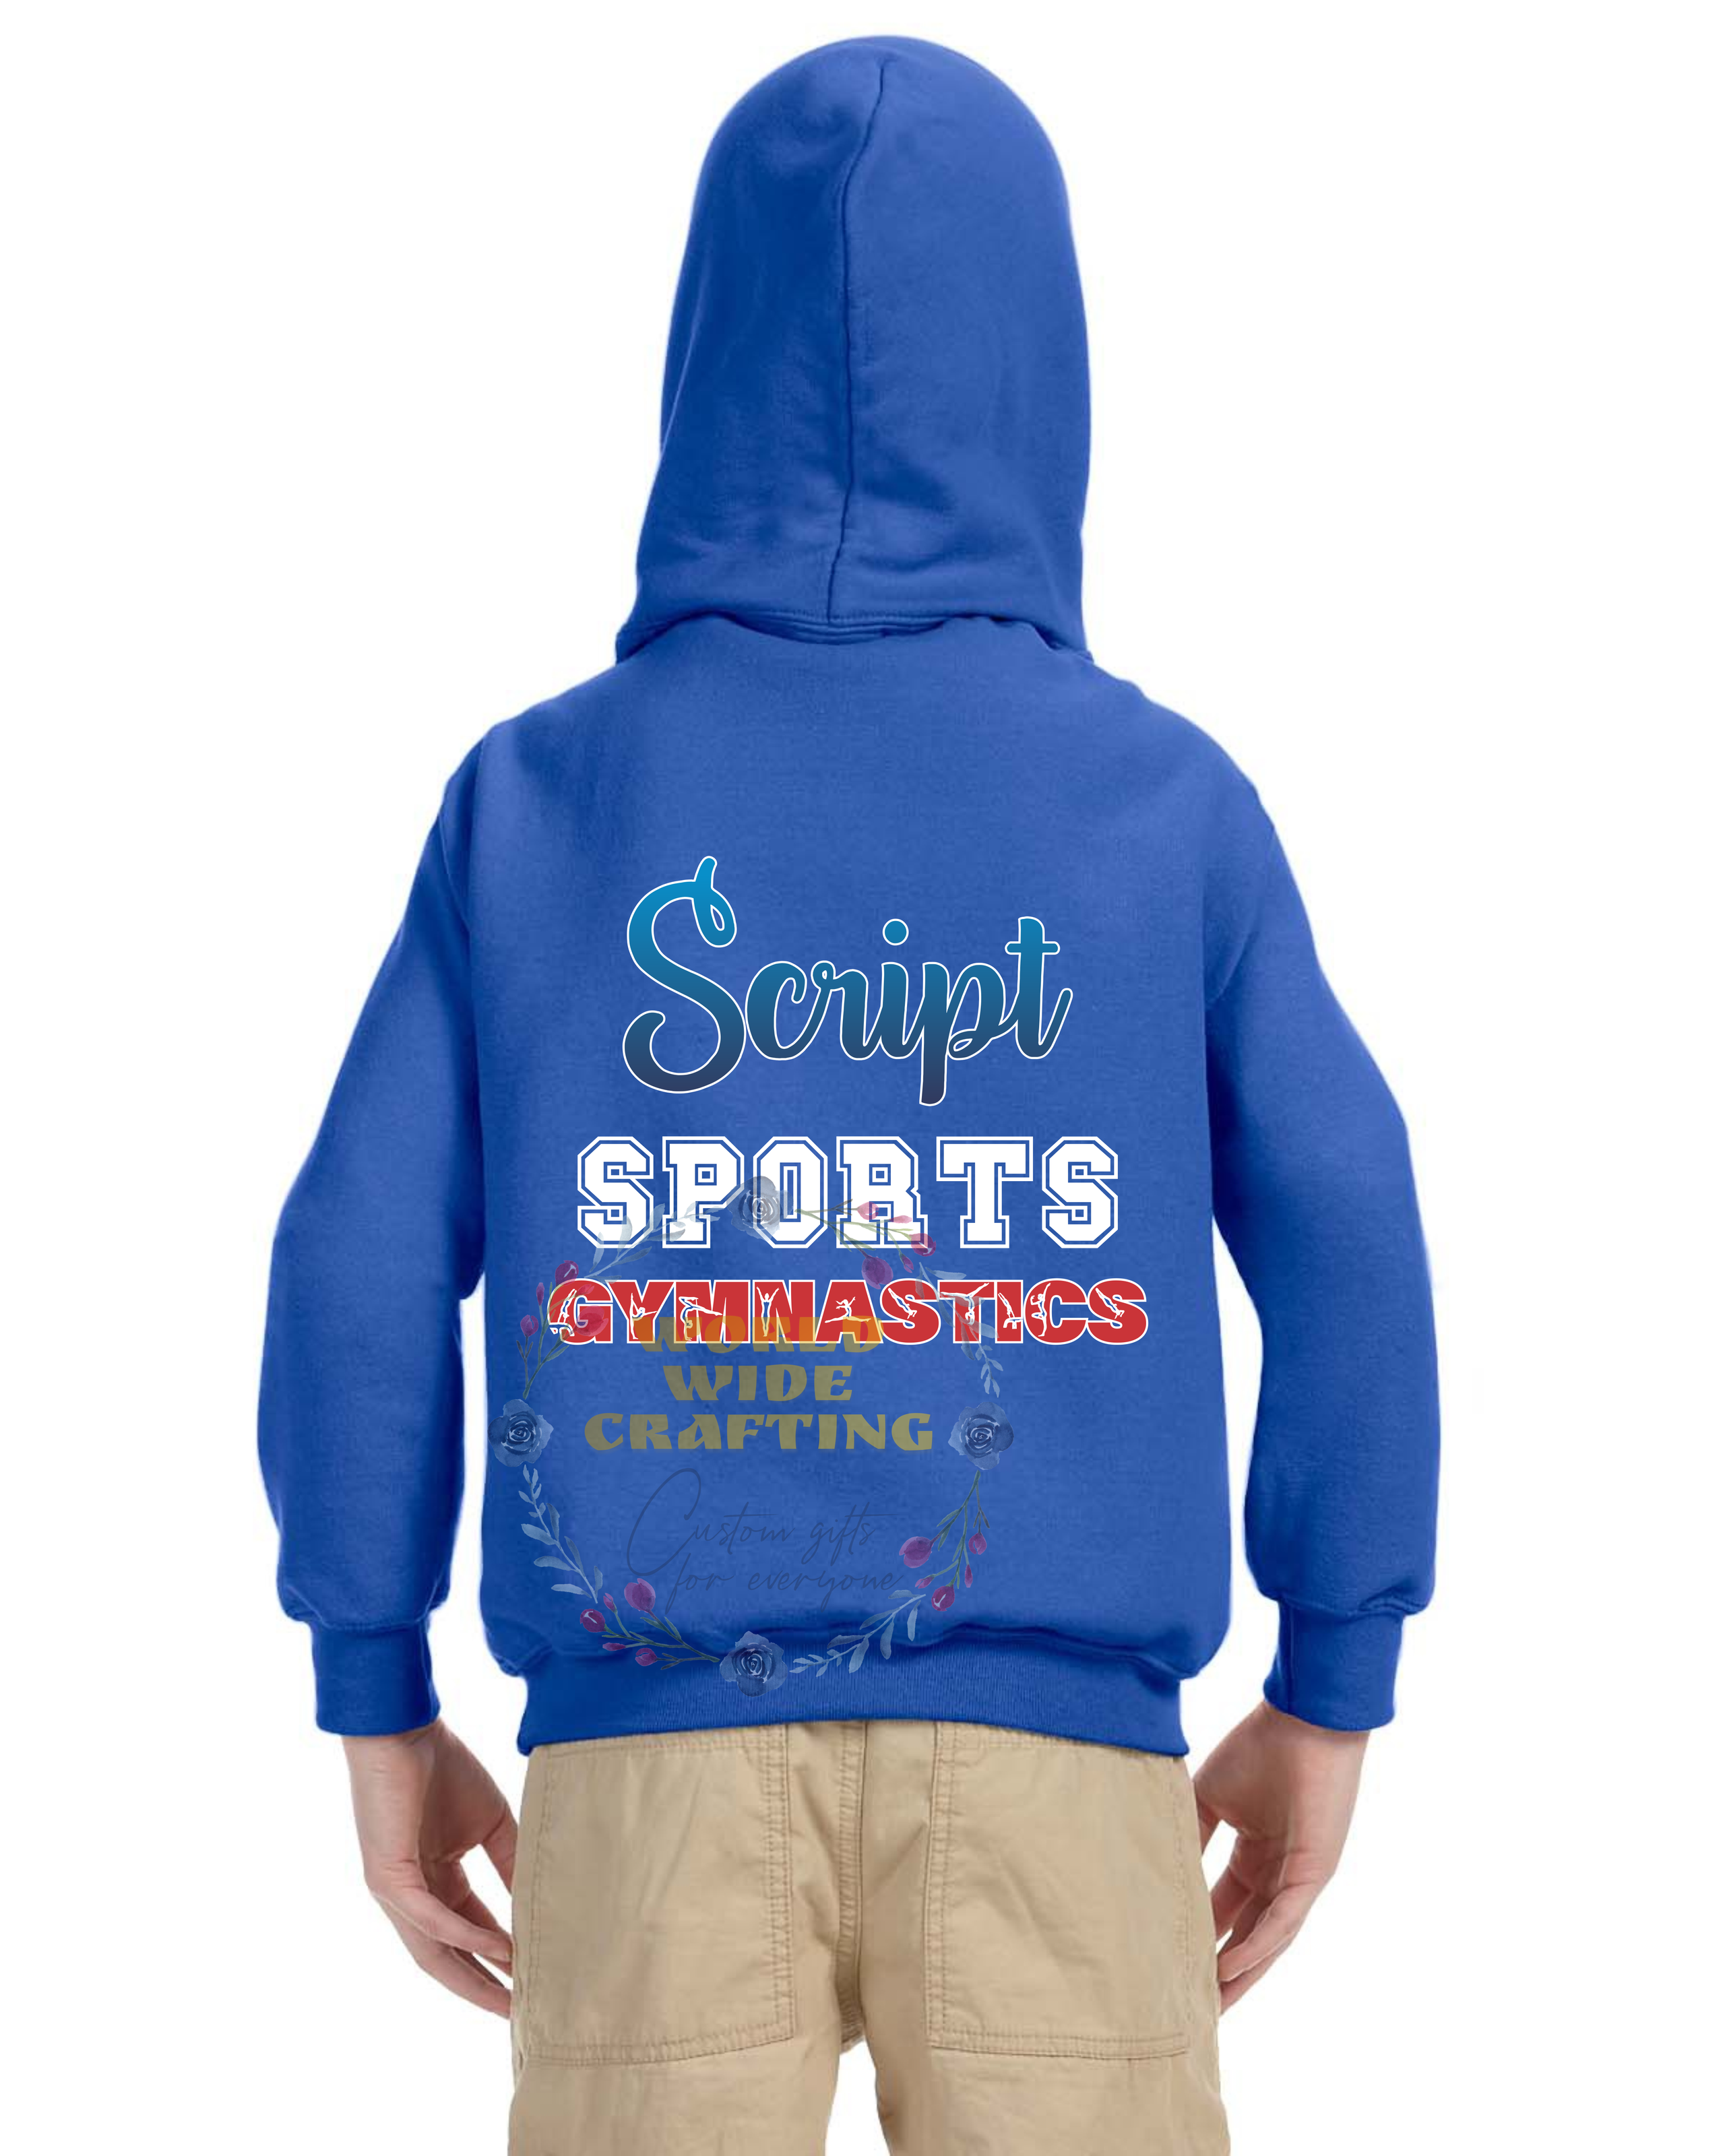 Personalized Hoodie - United Sports Academy | World Wide Crafting